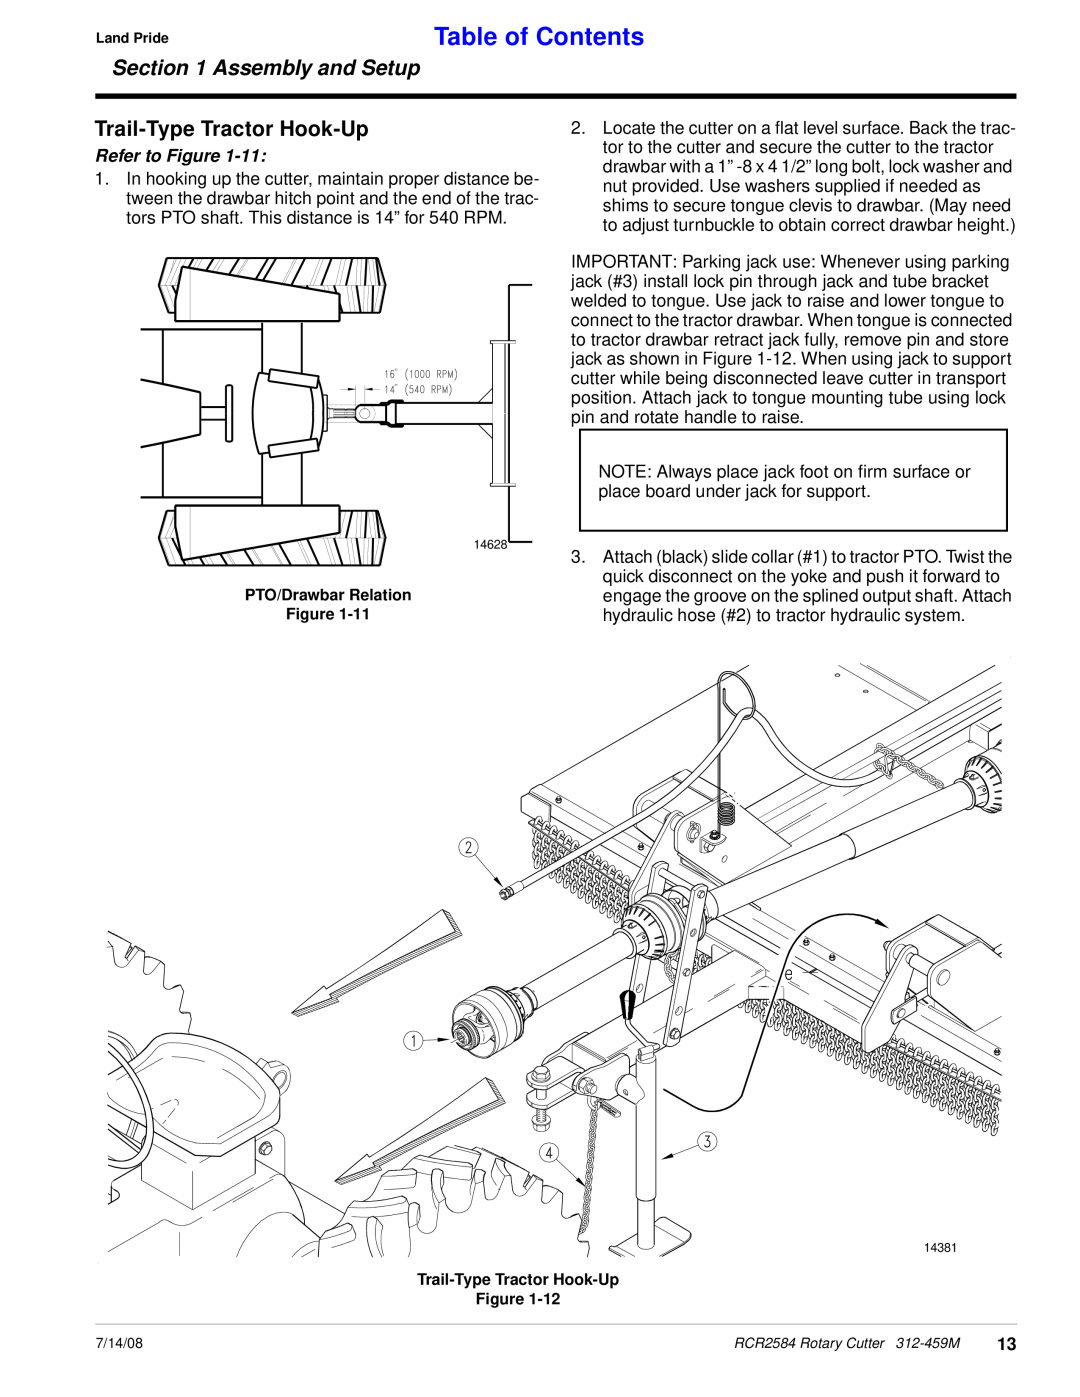 Land Pride RCR2584 manual Trail-Type Tractor Hook-Up, Table of Contents, Assembly and Setup, Refer to Figure 